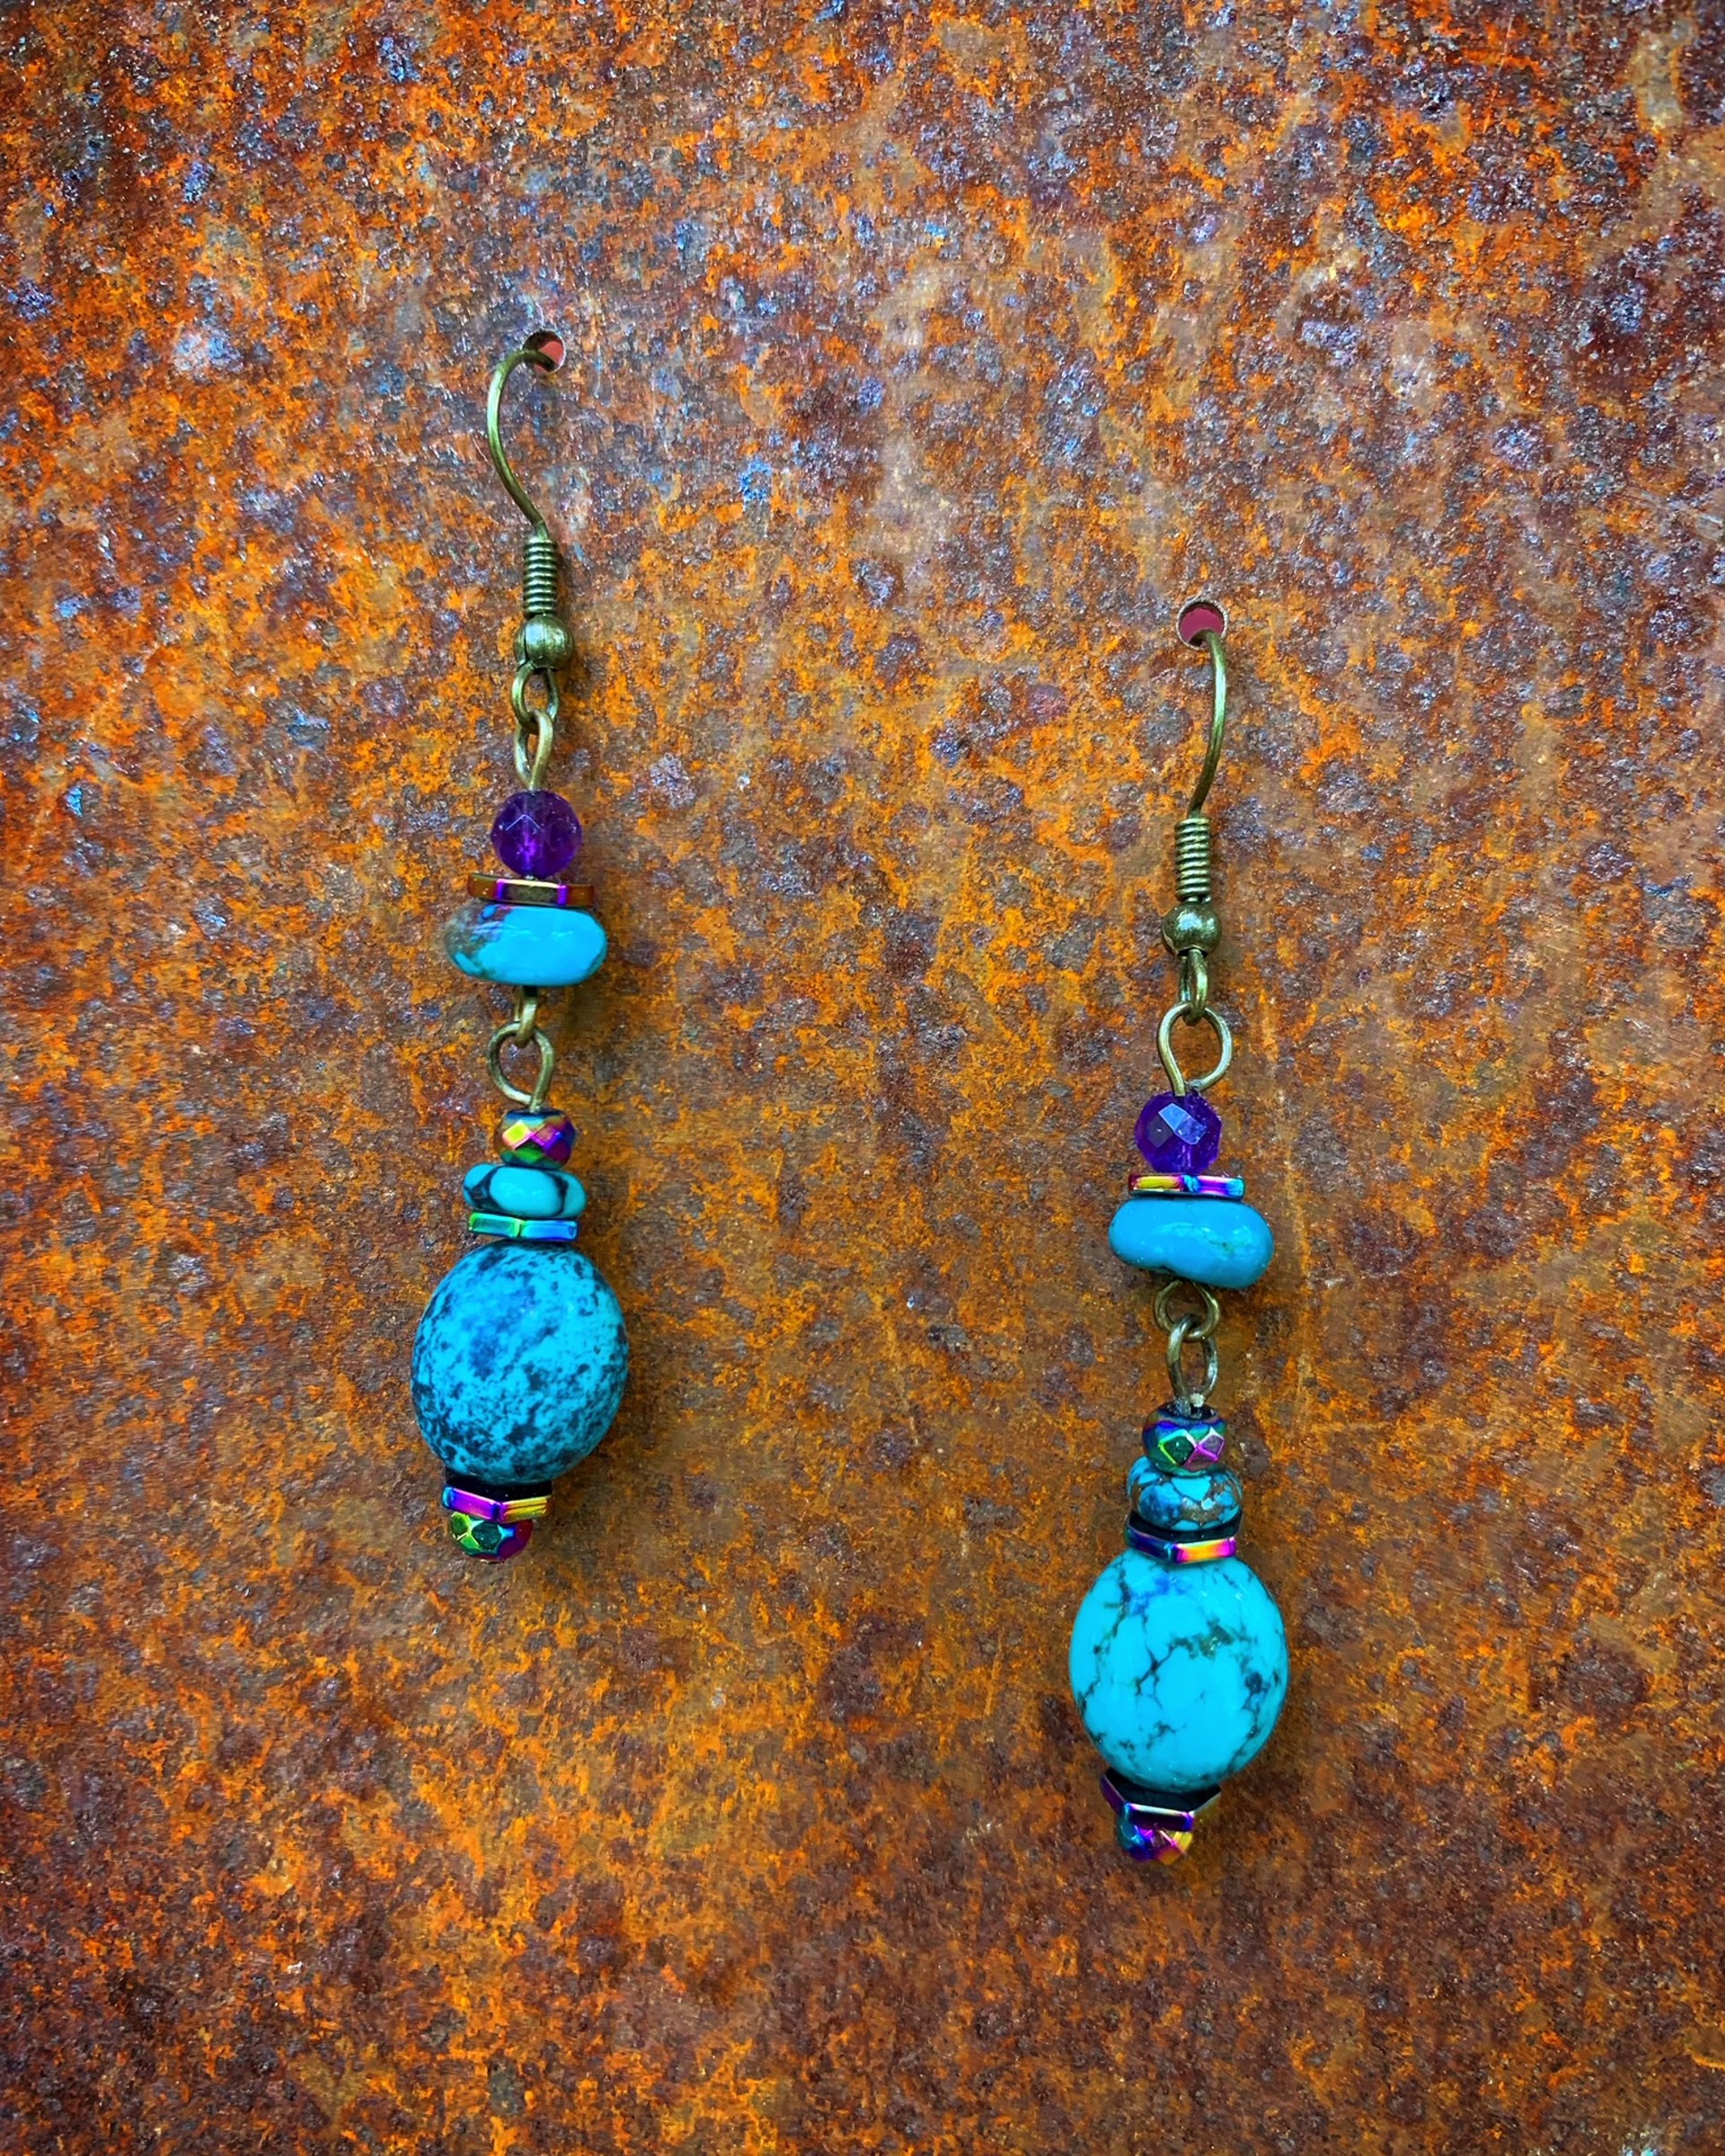 K849 Amethyst and Turquoise Earrings by Kelly Ormsby